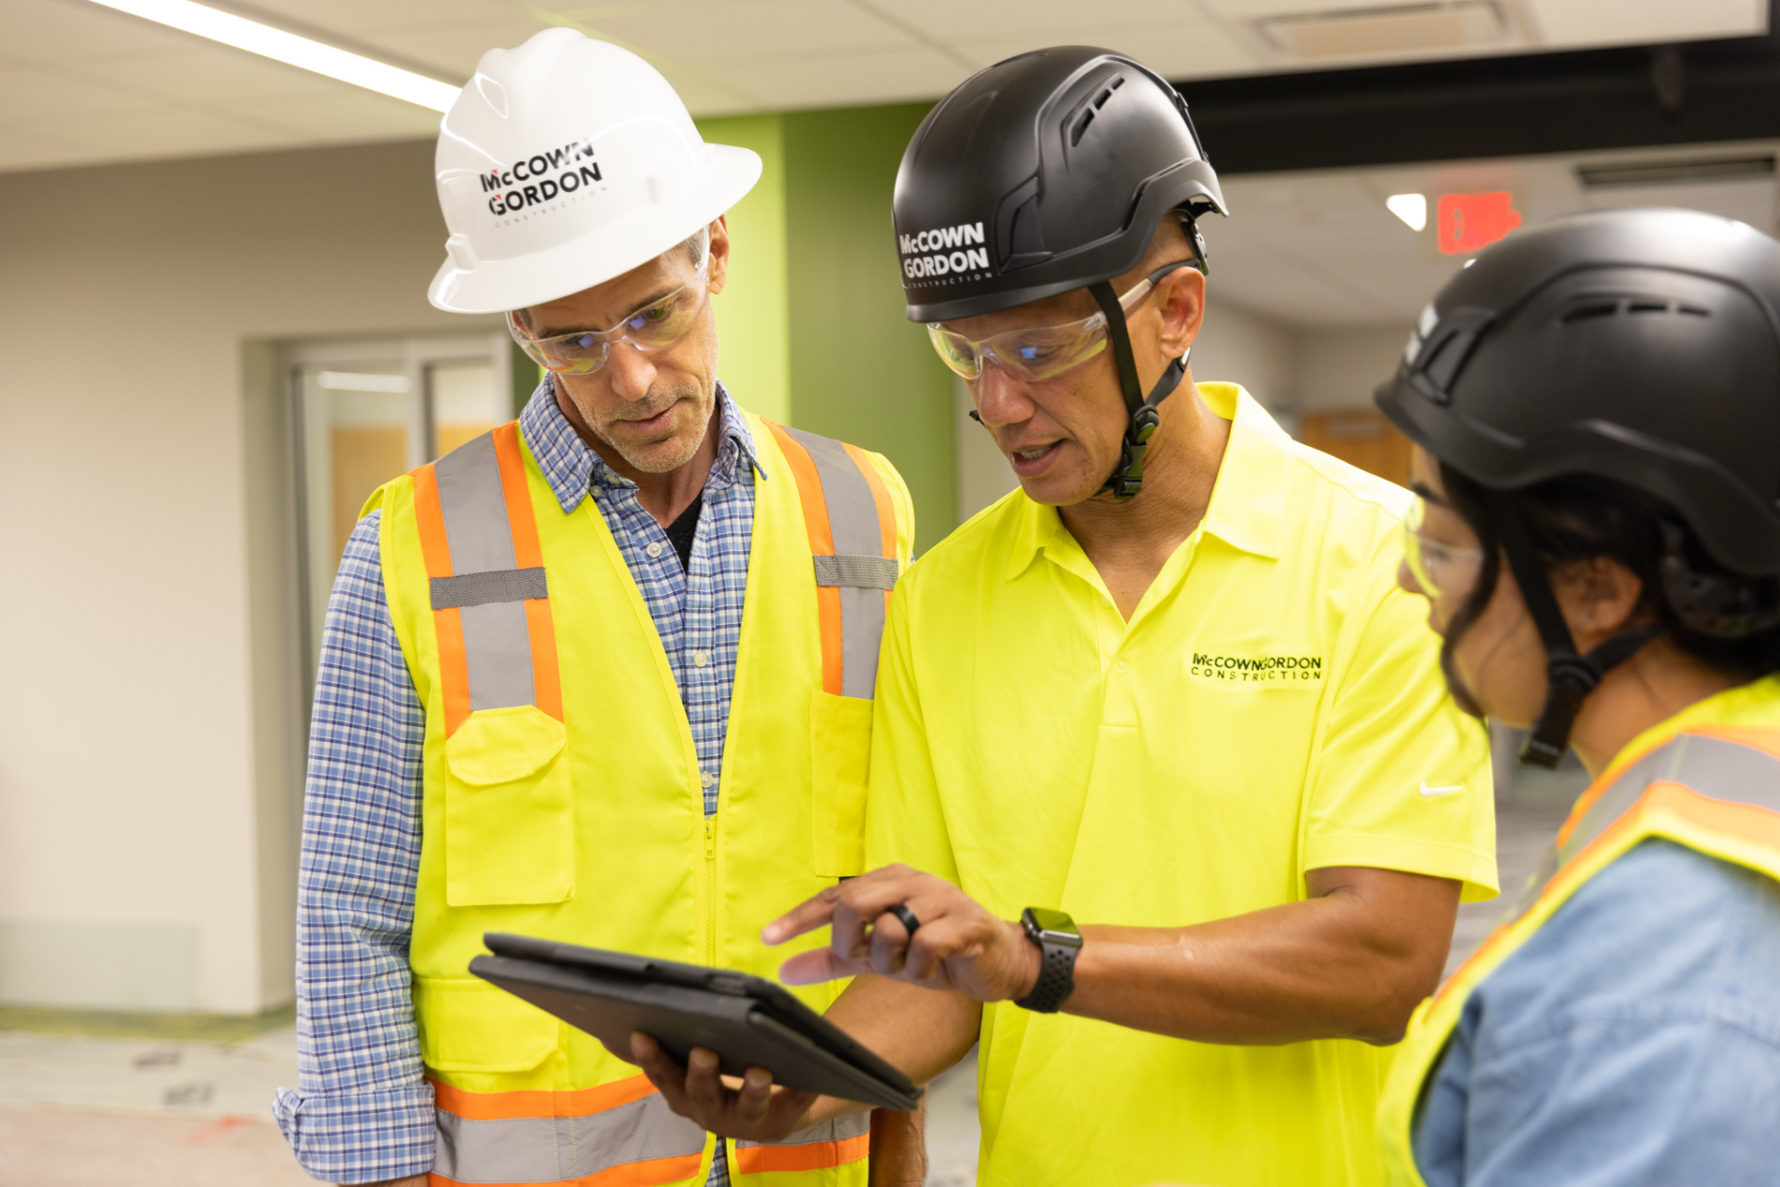 McCownGordon employees looking at an ipad on a construction site